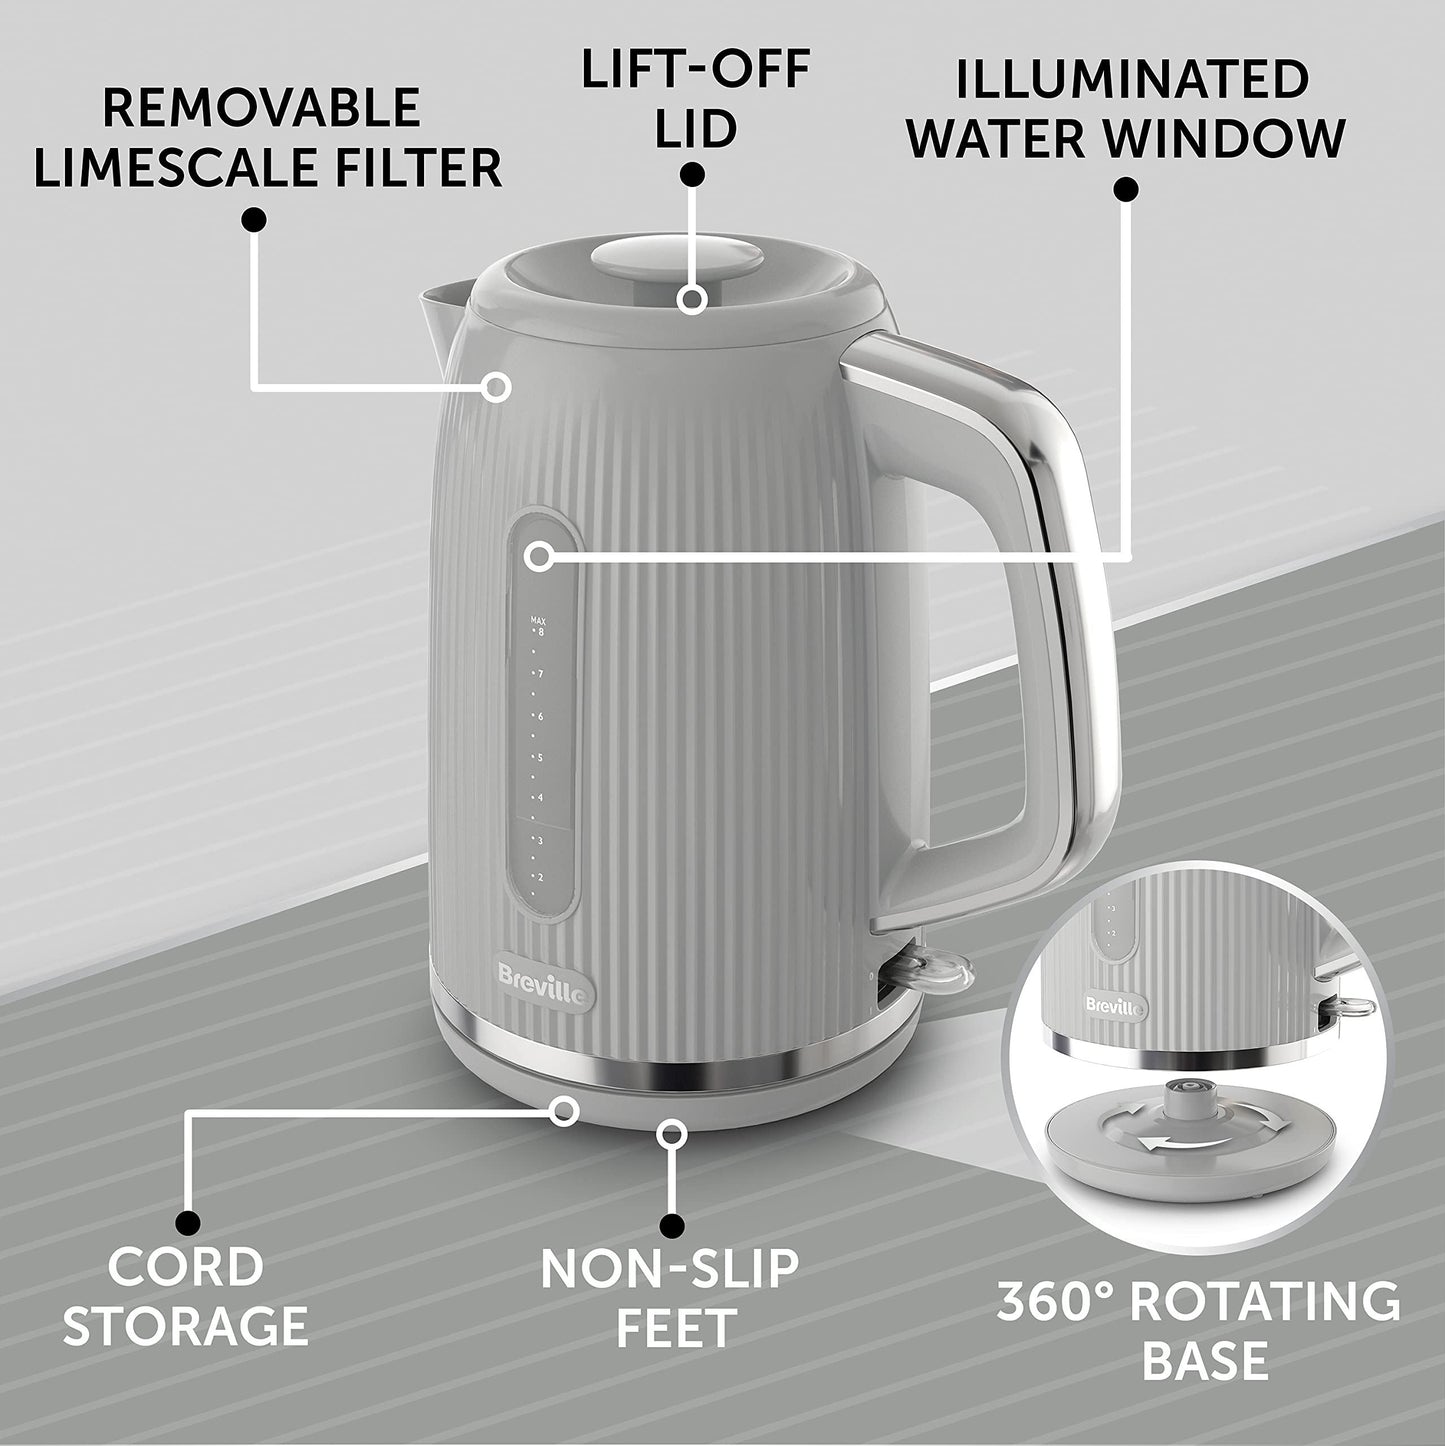 Breville Bold Ice Grey 1.7L Electric Kettle